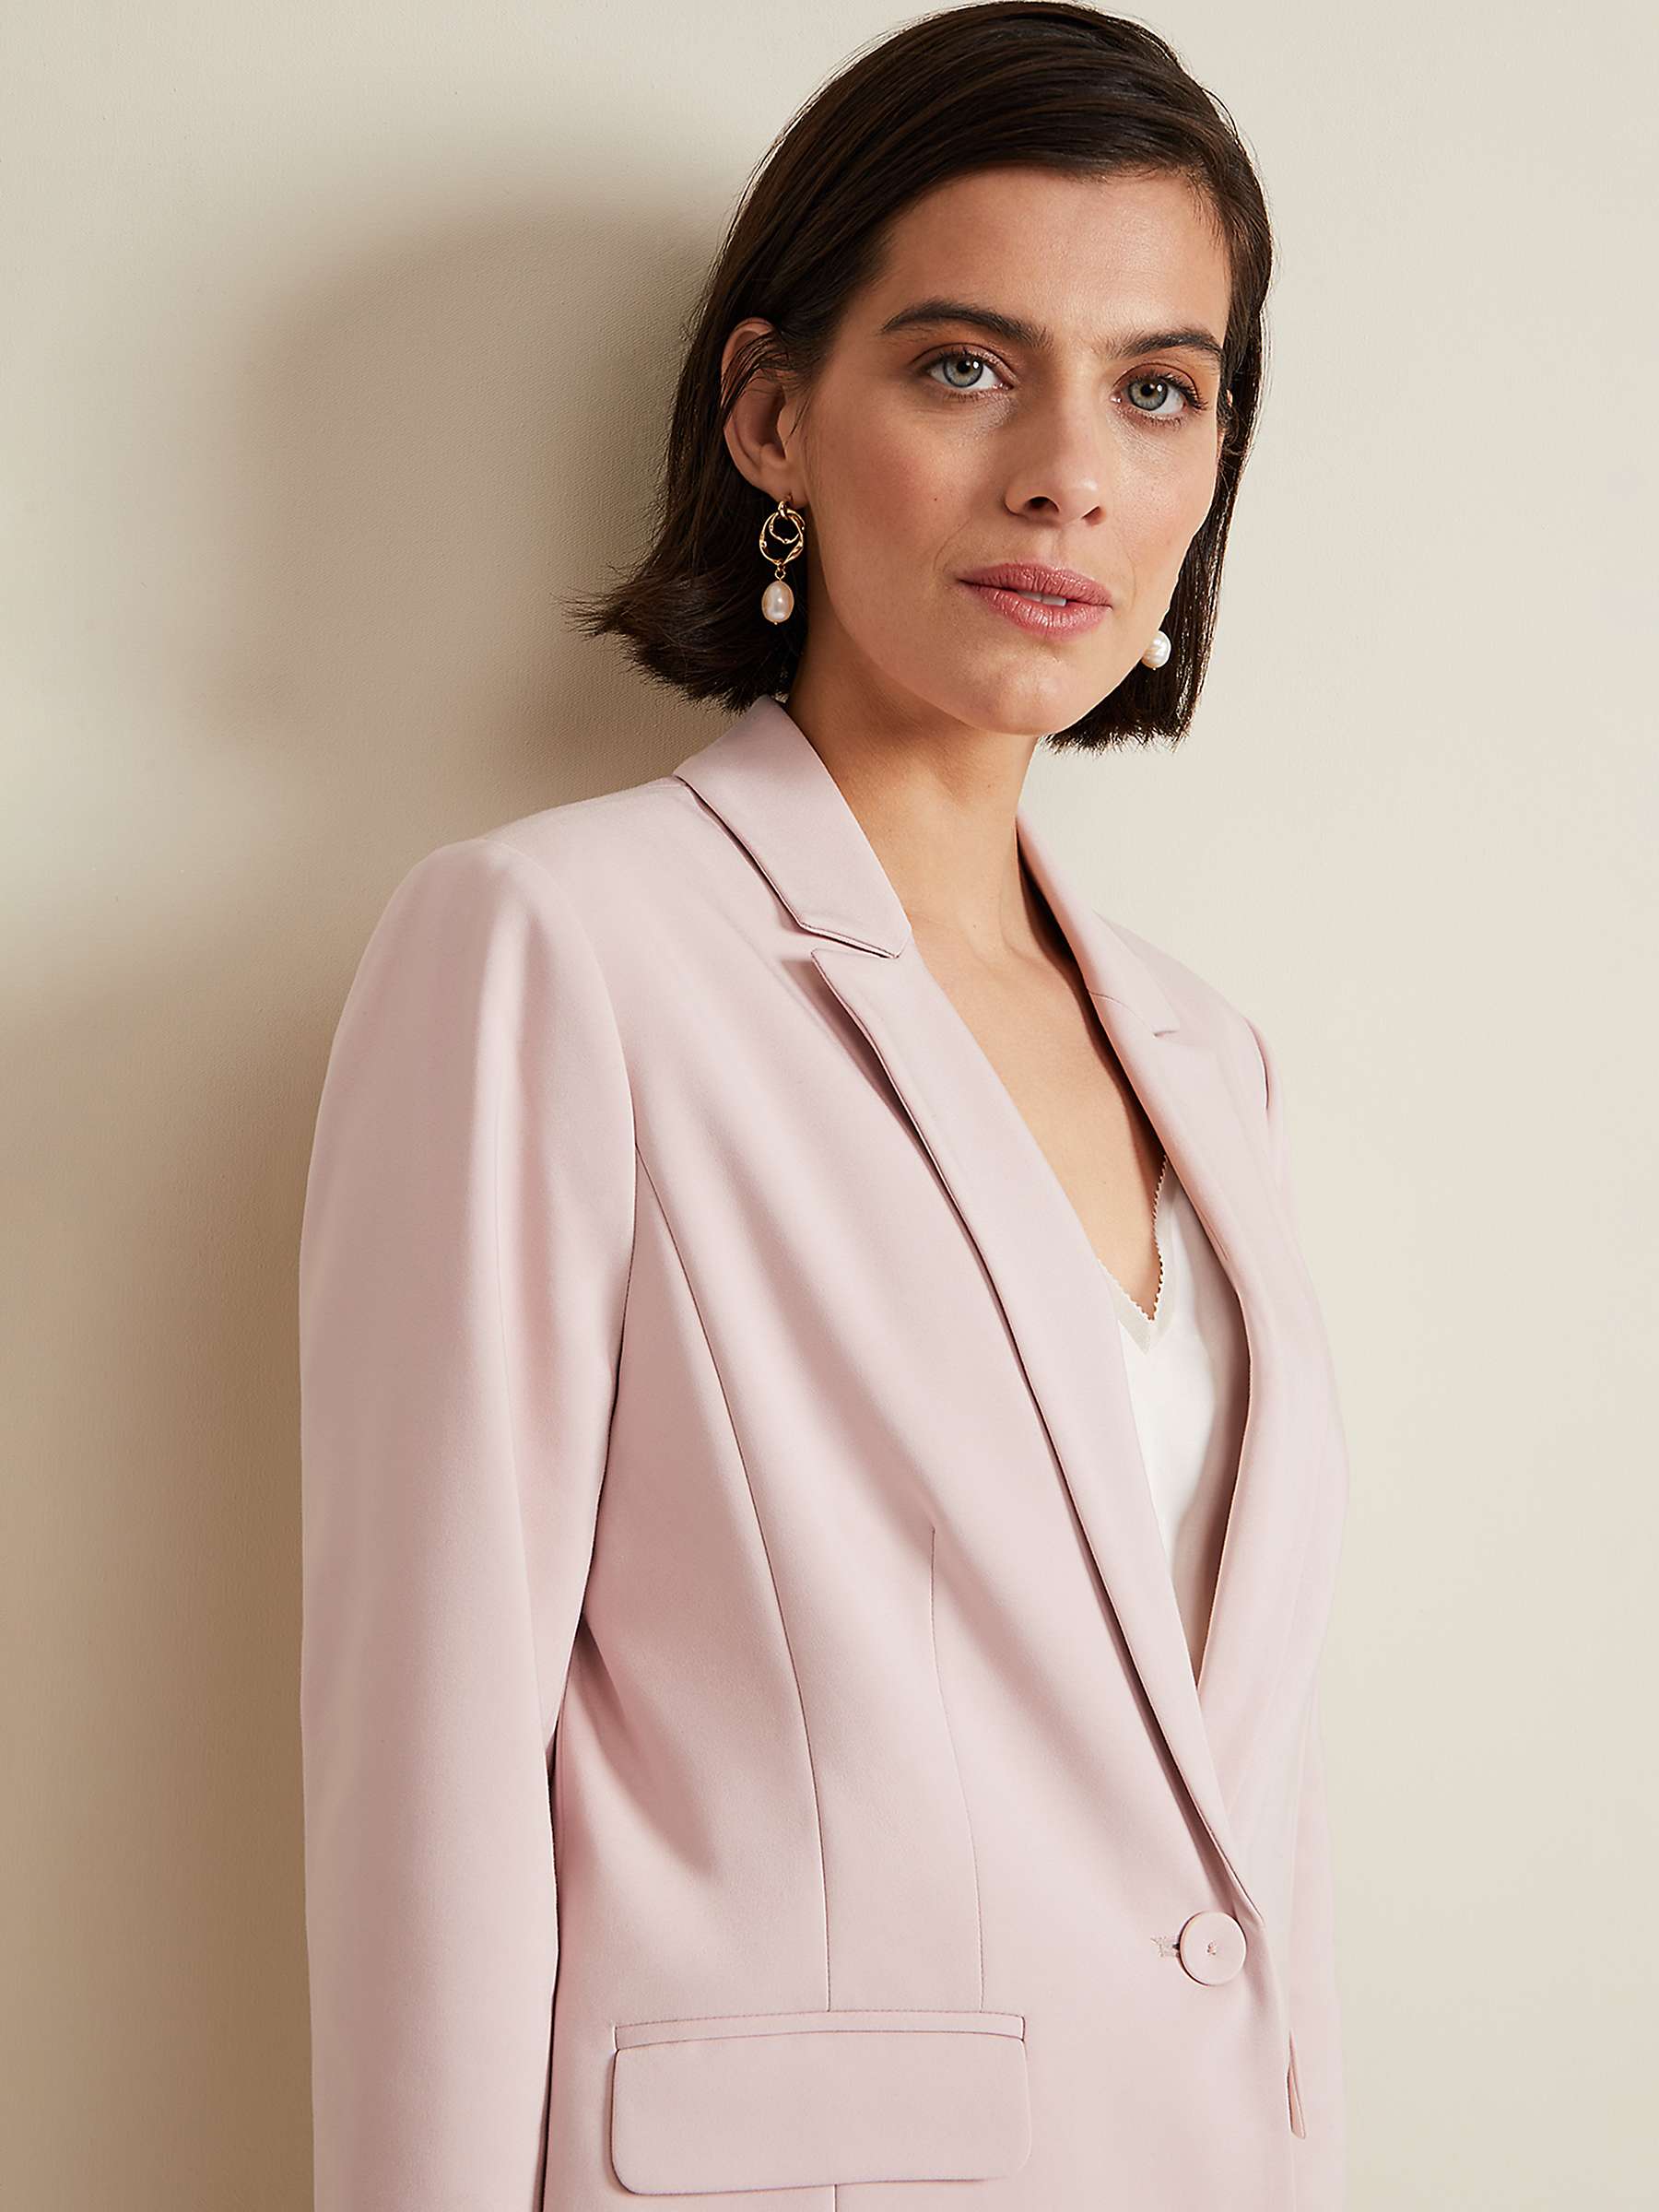 Buy Phase Eight Ulrica Suit Jacket Online at johnlewis.com